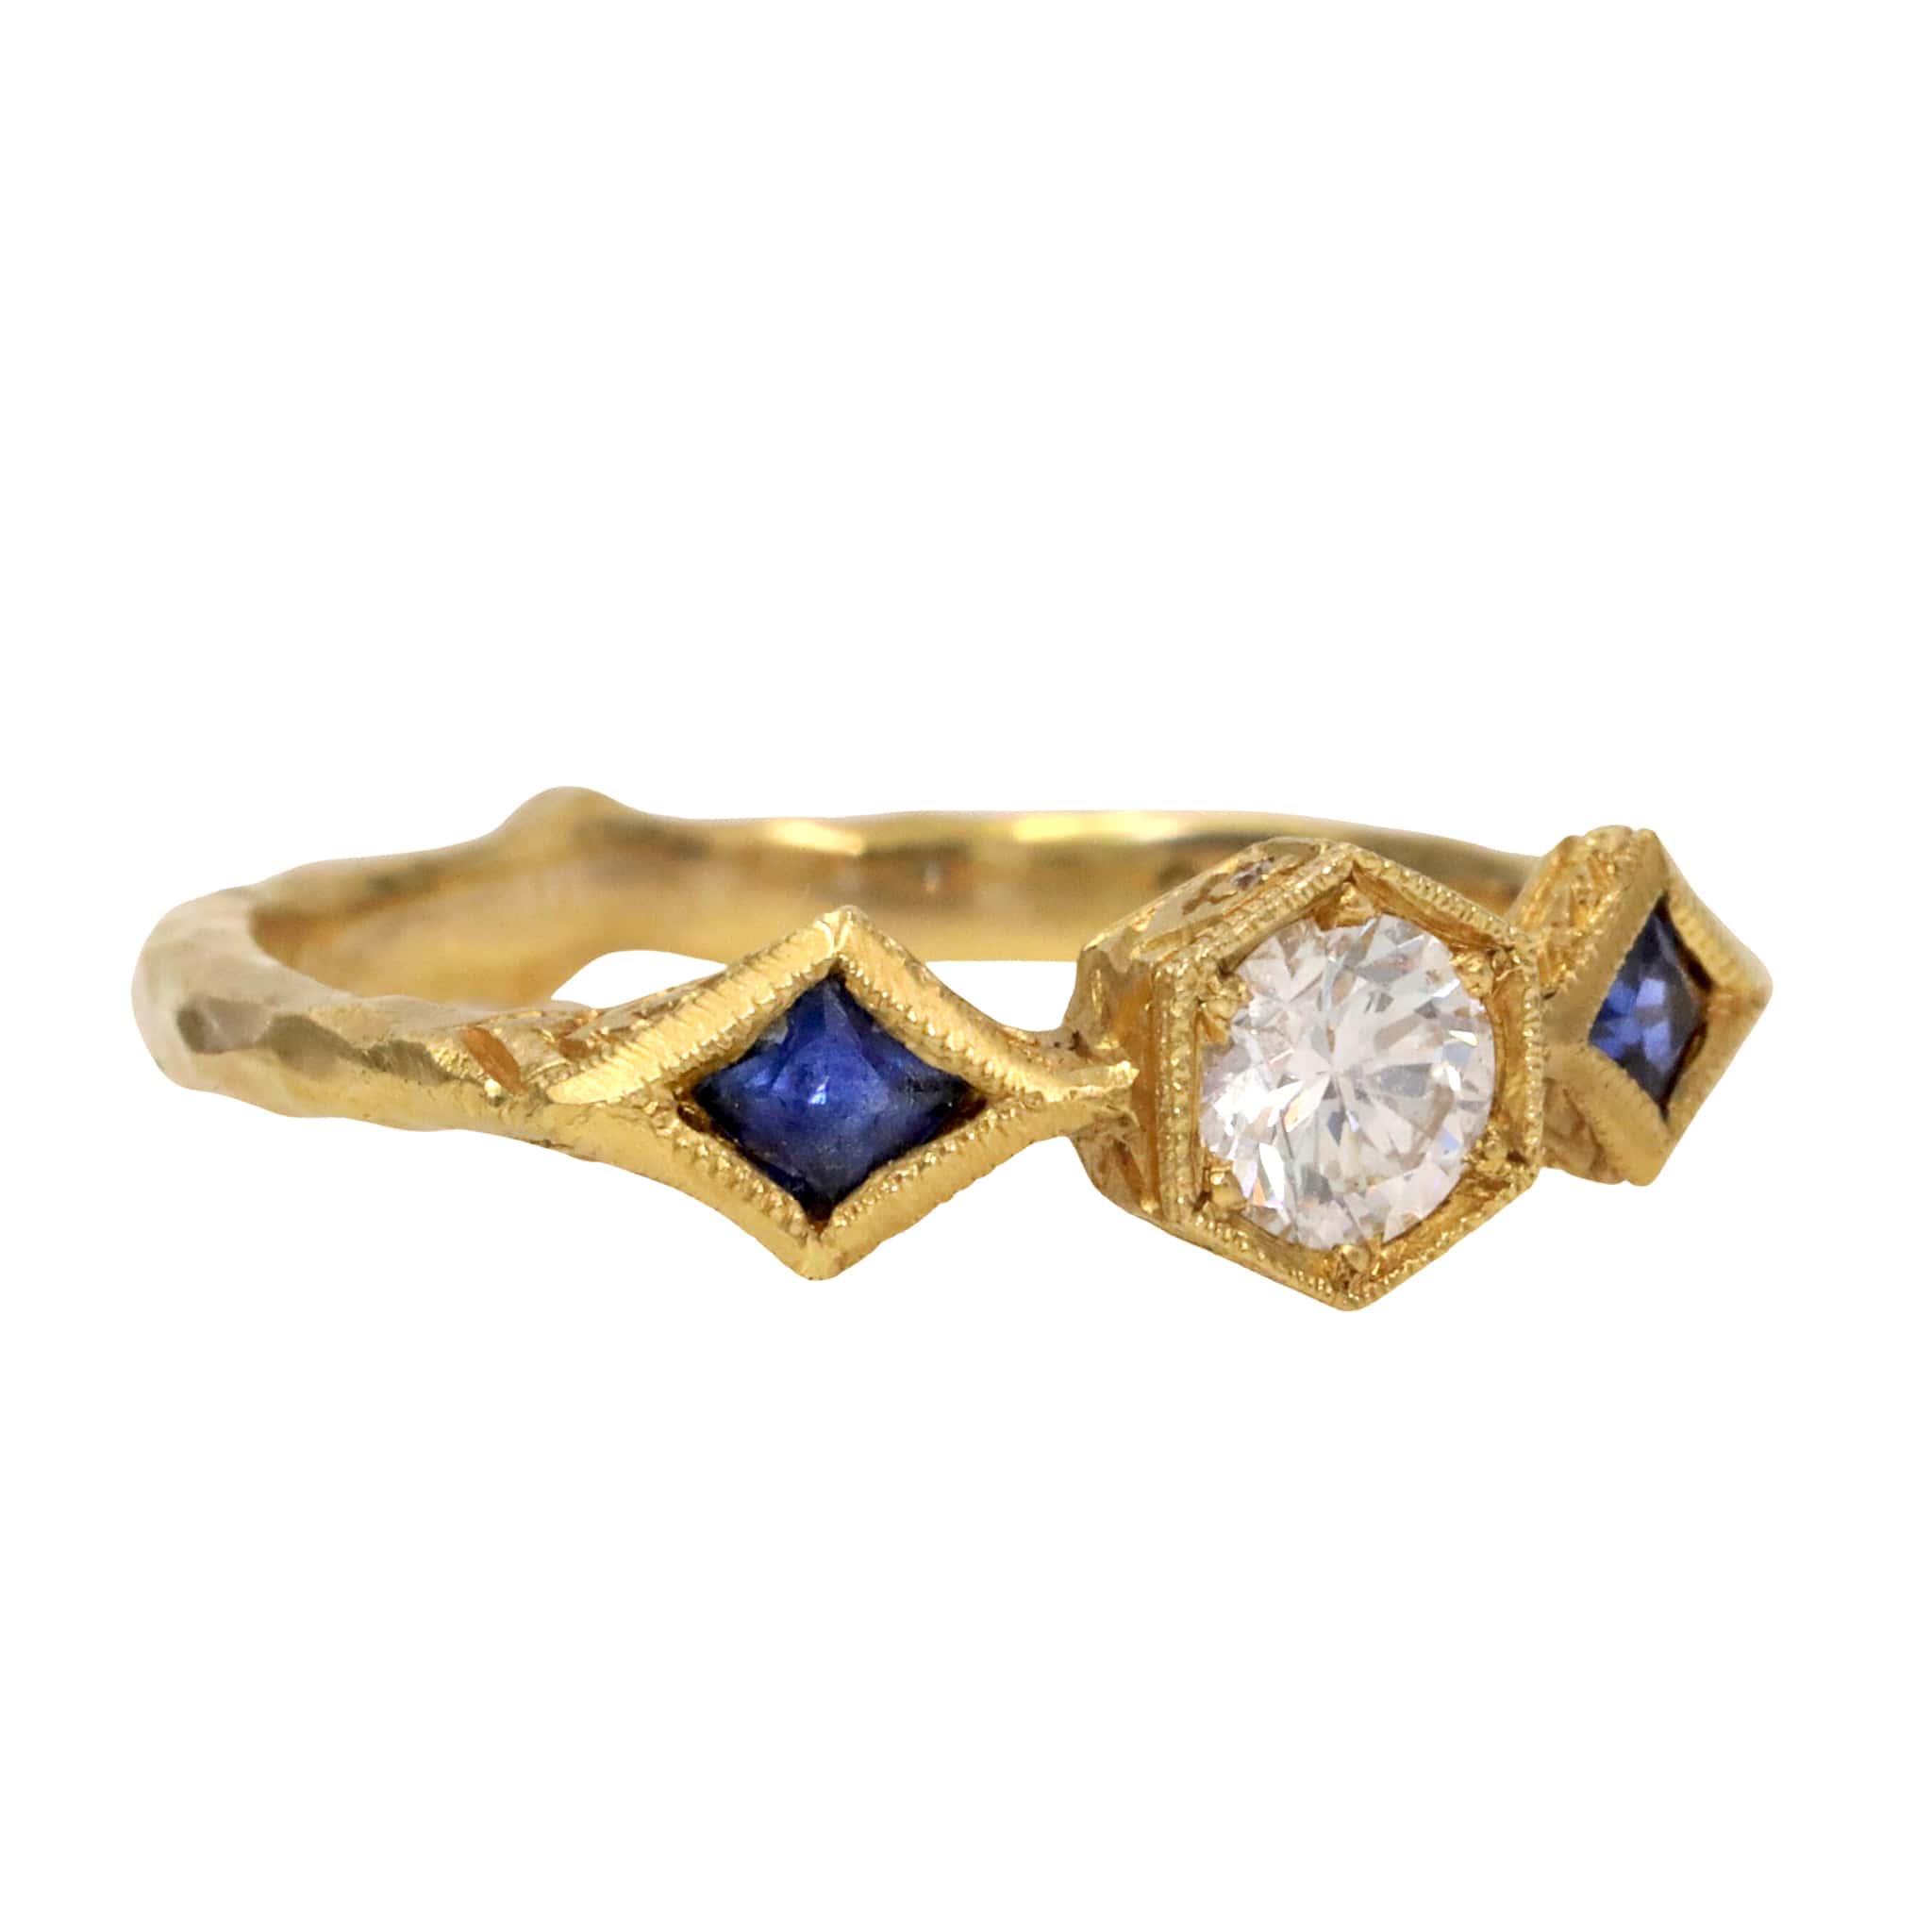 Cathy Waterman 22K Gold Diamond Ring with Blue Sapphires